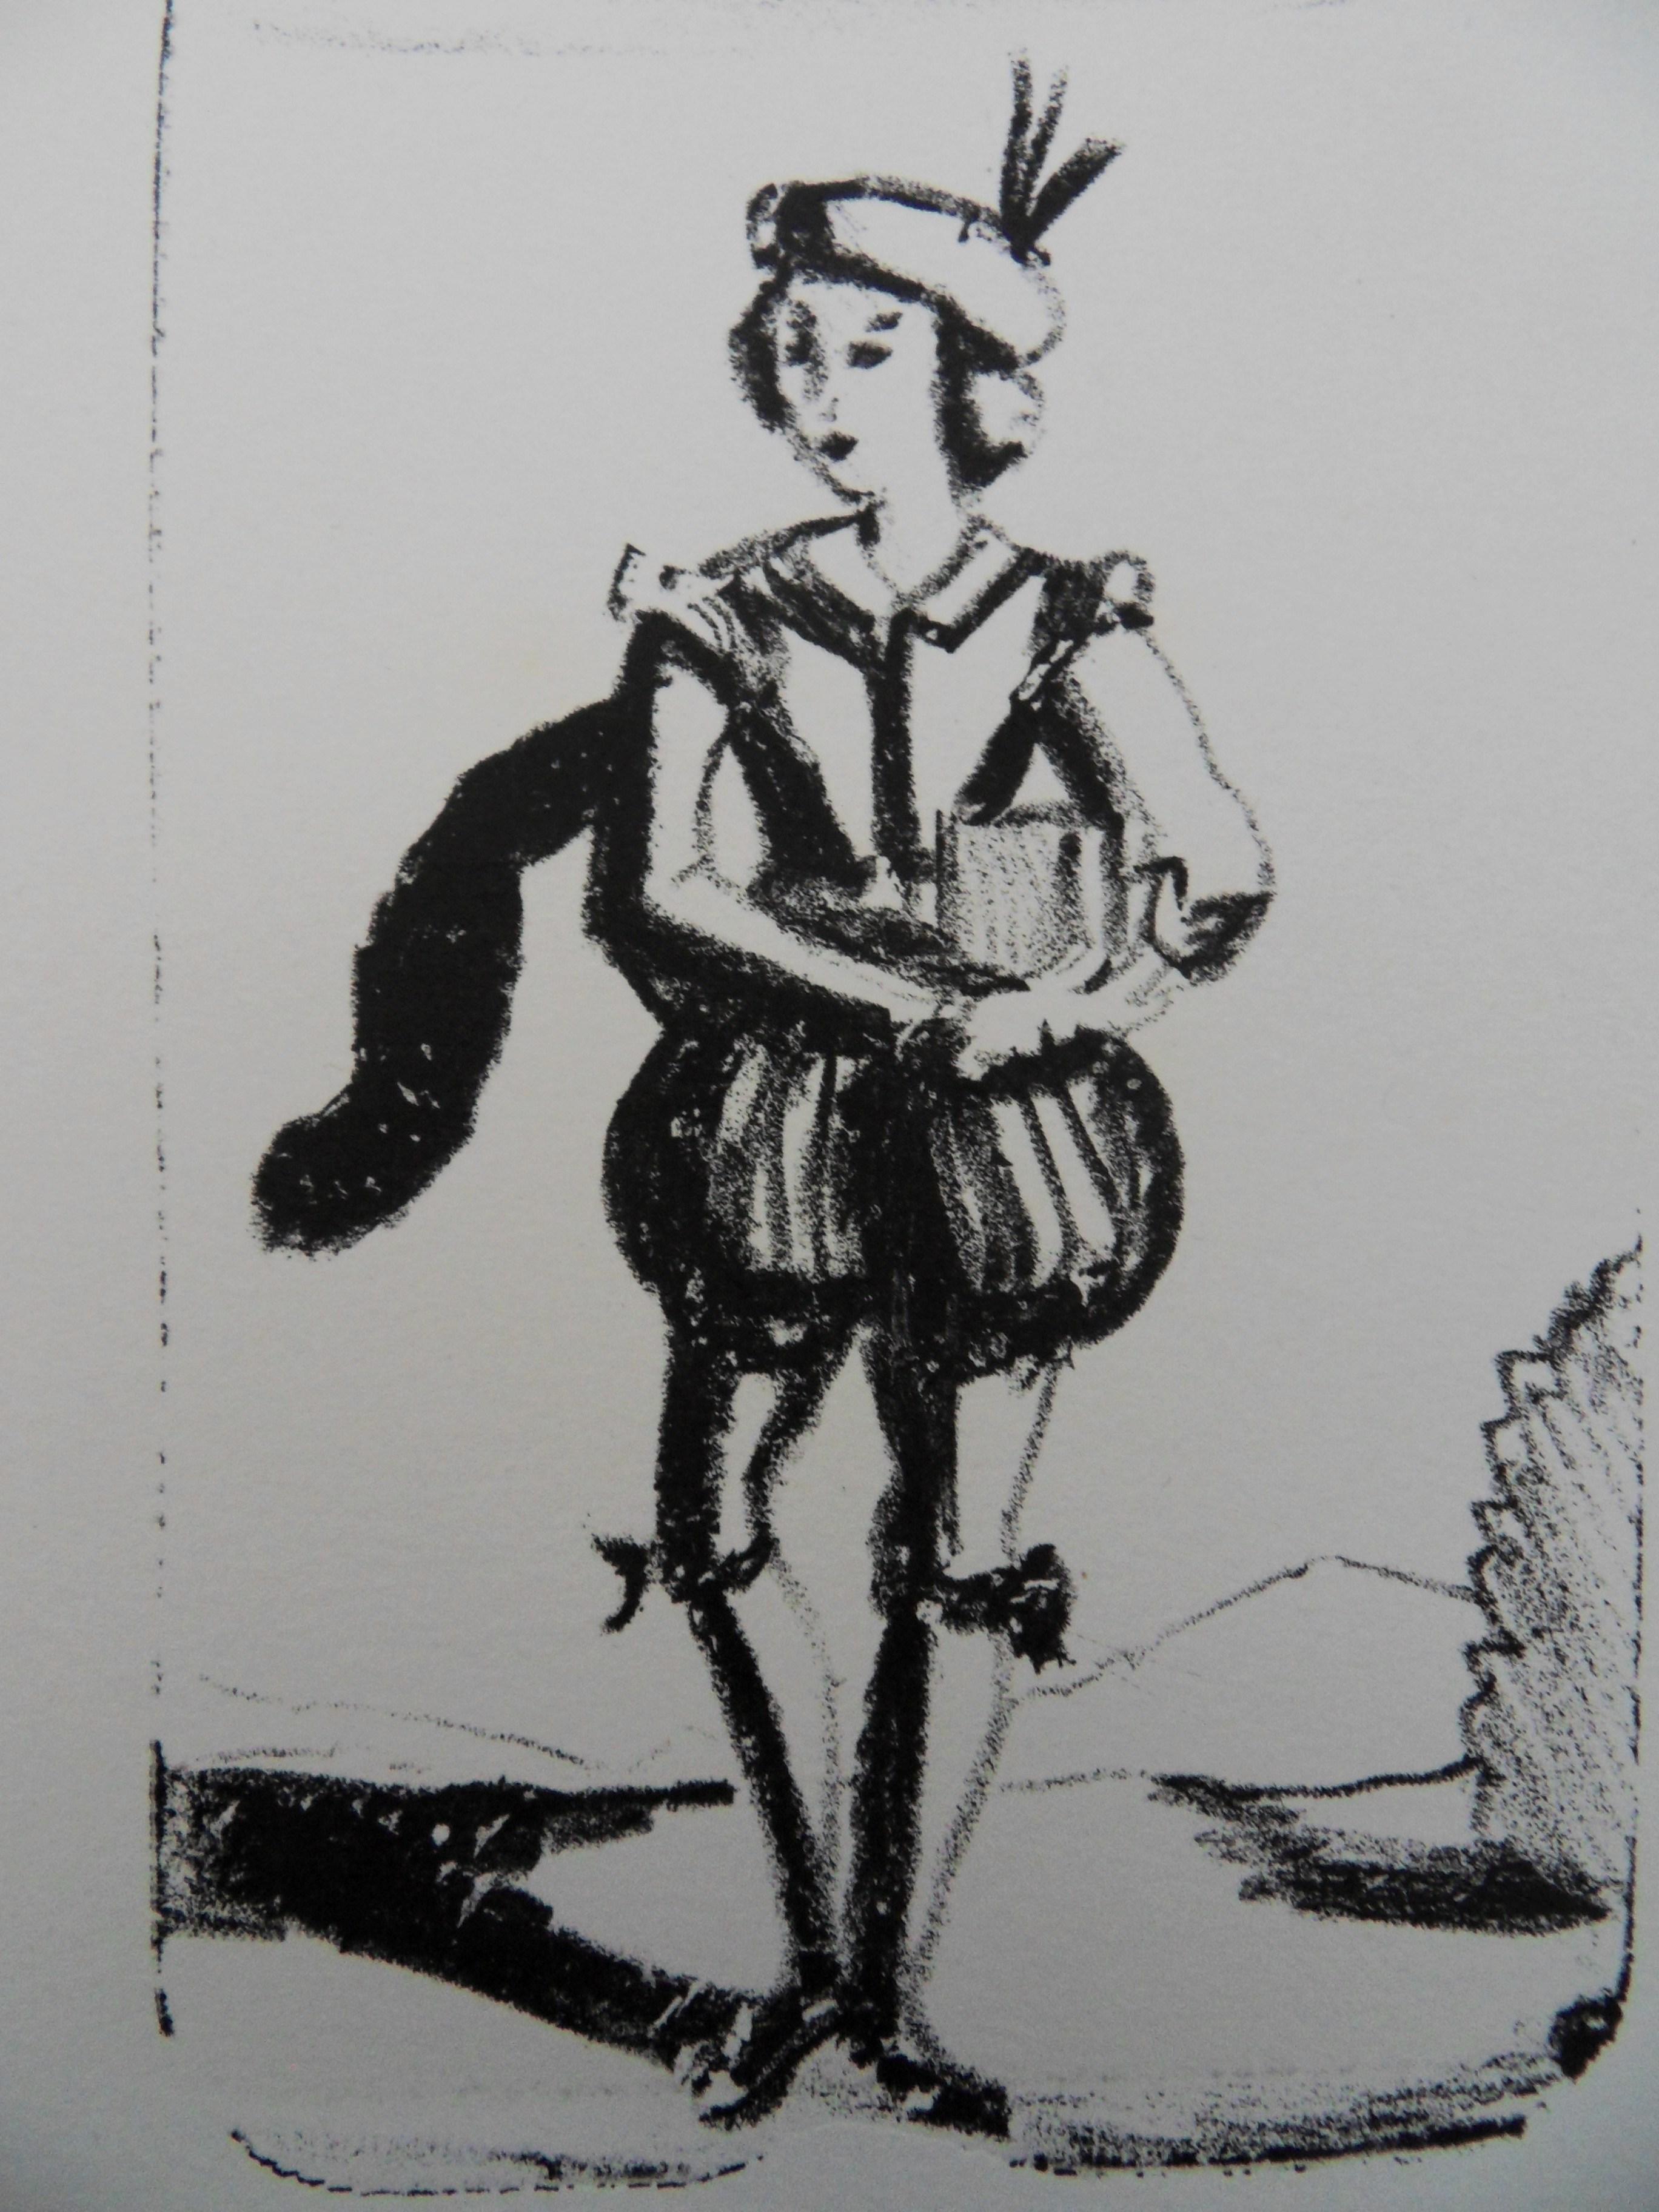 The Young Boy - Lithograph, 1950 - Print by André Derain